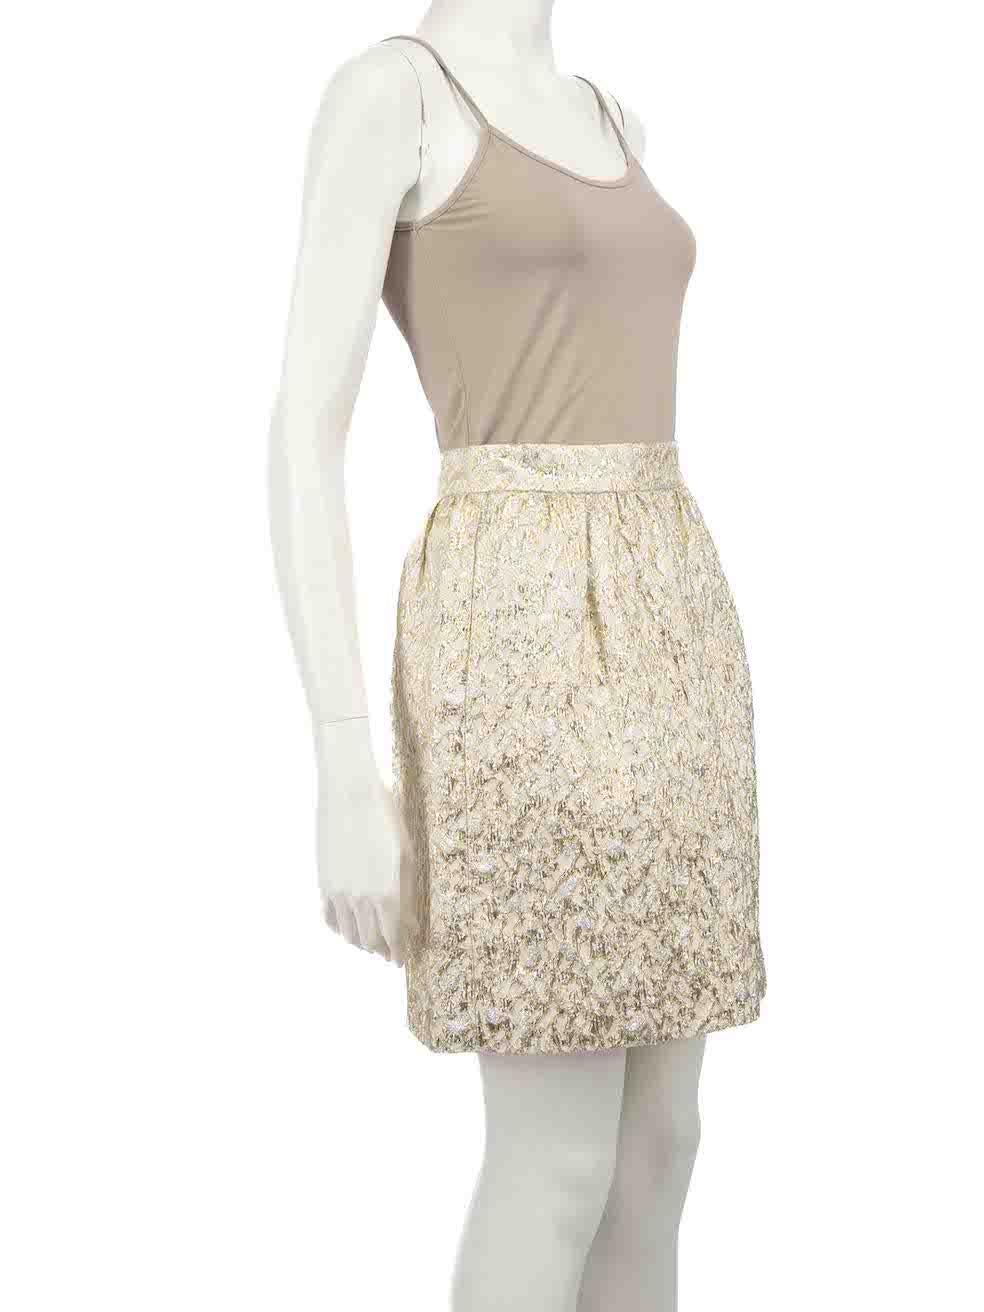 CONDITION is Very good. Hardly any visible wear to skirt is evident on this used Dolce & Gabbana designer resale item.
 
 
 
 Details
 
 
 Gold metallic
 
 Synthetic
 
 Flared skirt
 
 Abstract pattern
 
 Mini
 
 Silver metallic accent
 
 Back zip